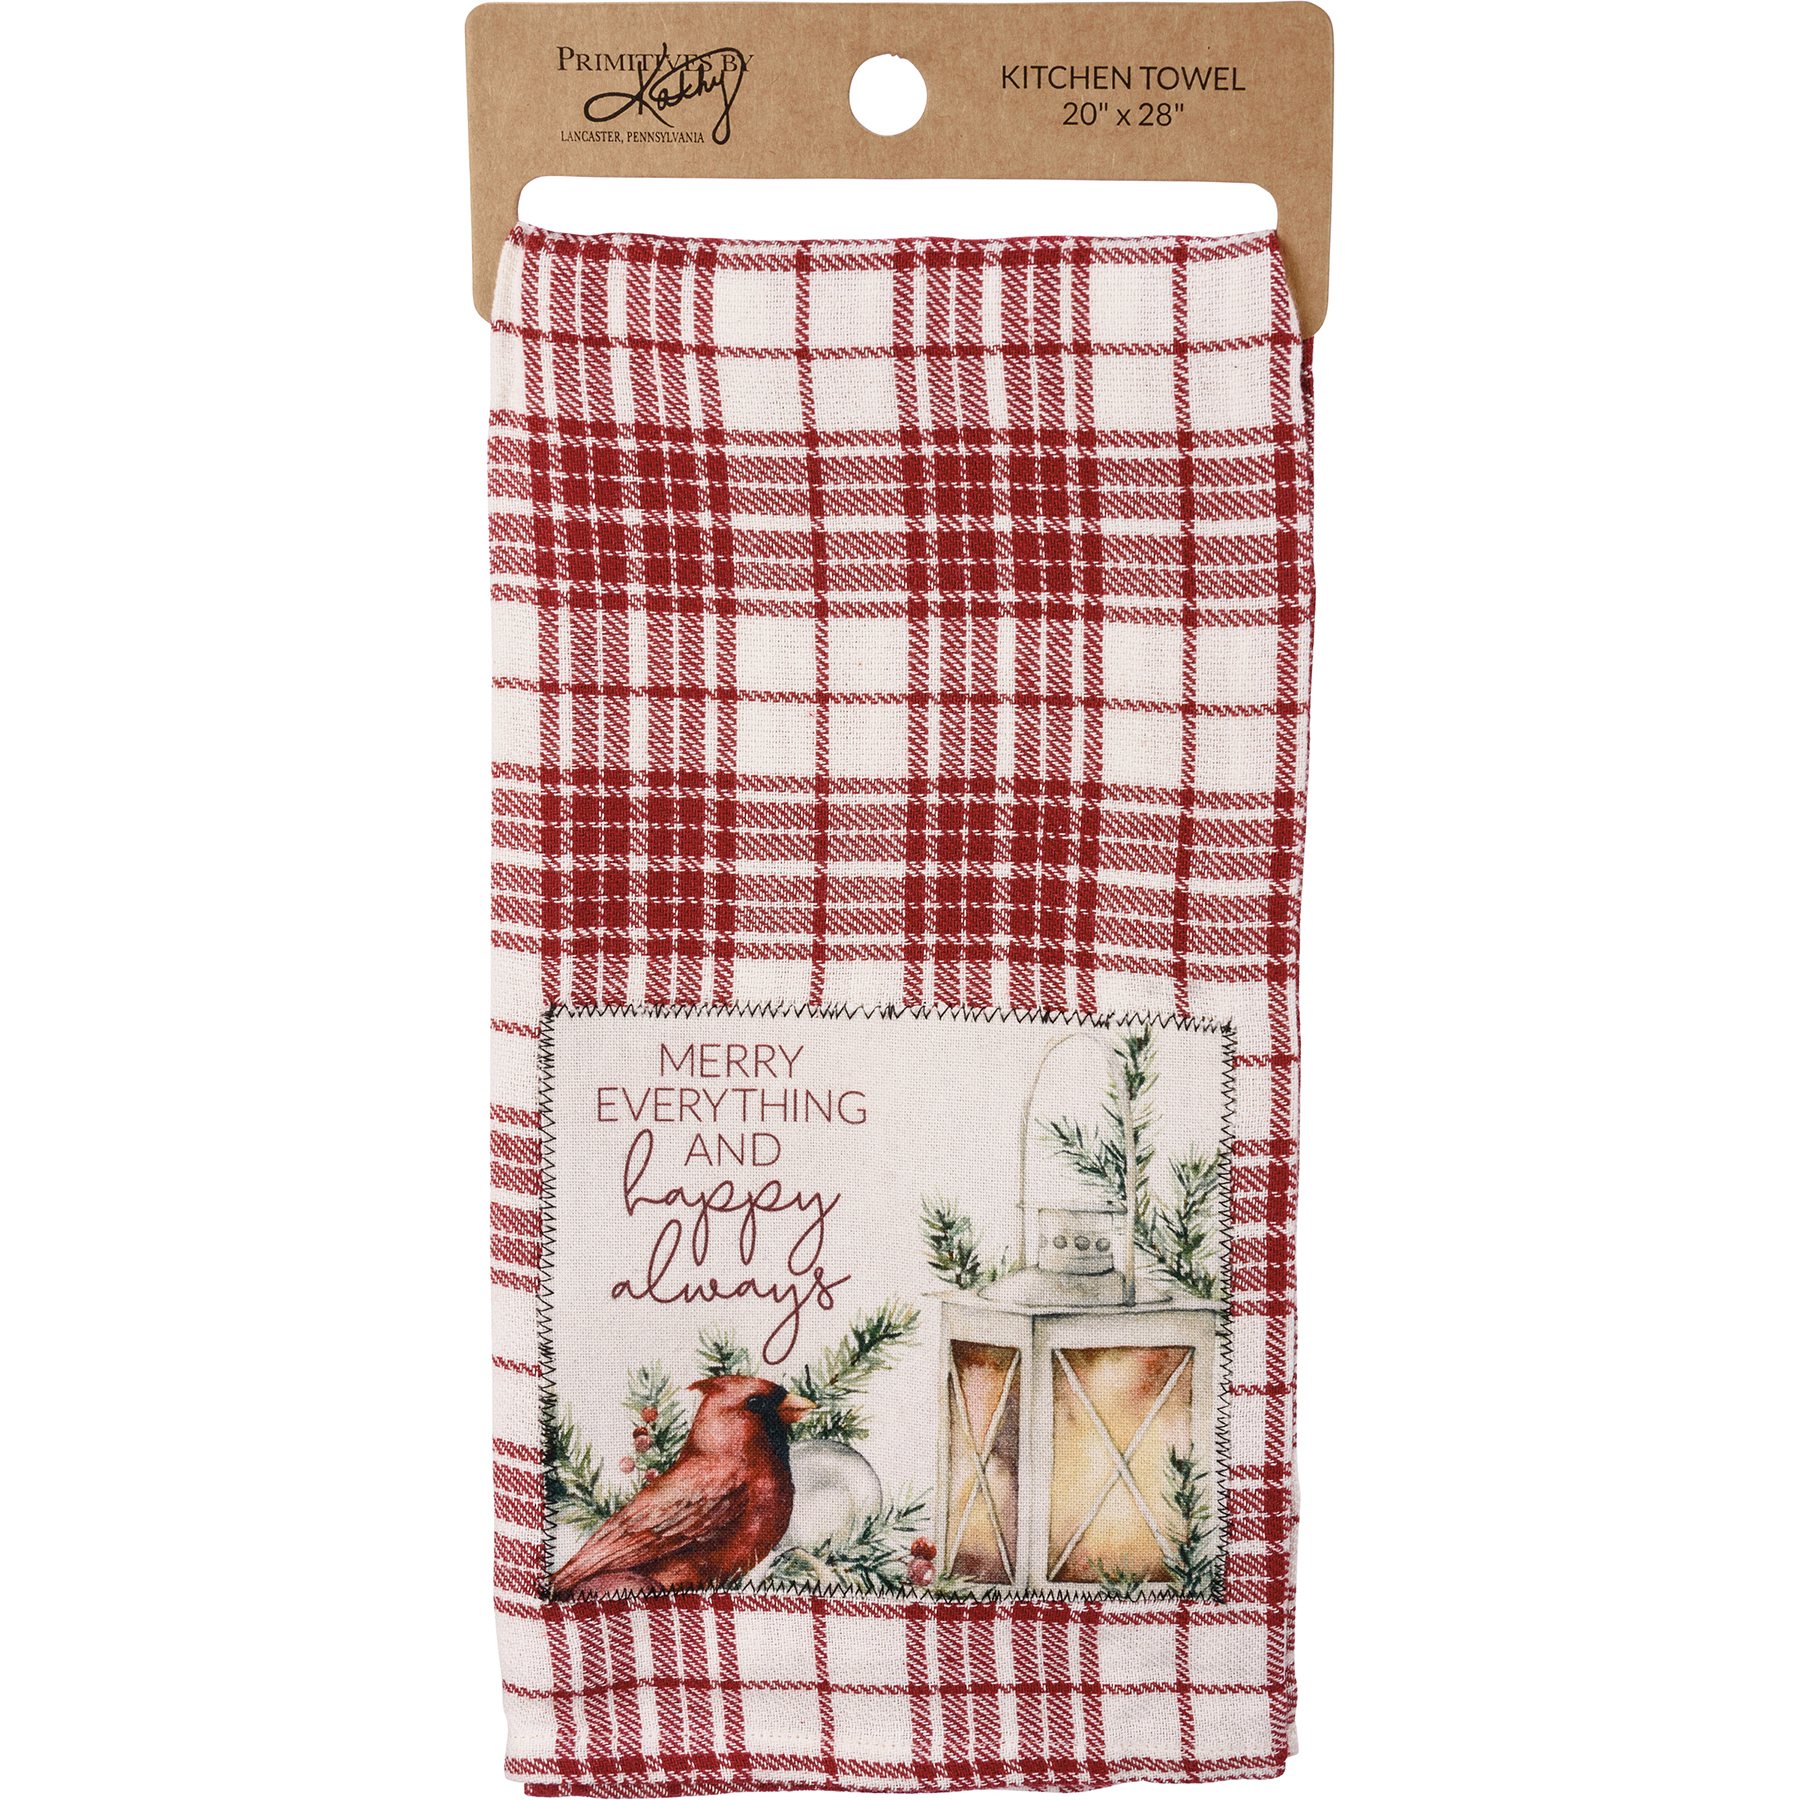 Primitives by Kathy Merry Christmas Plaid Kitchen Dish Towel - 20 x 28